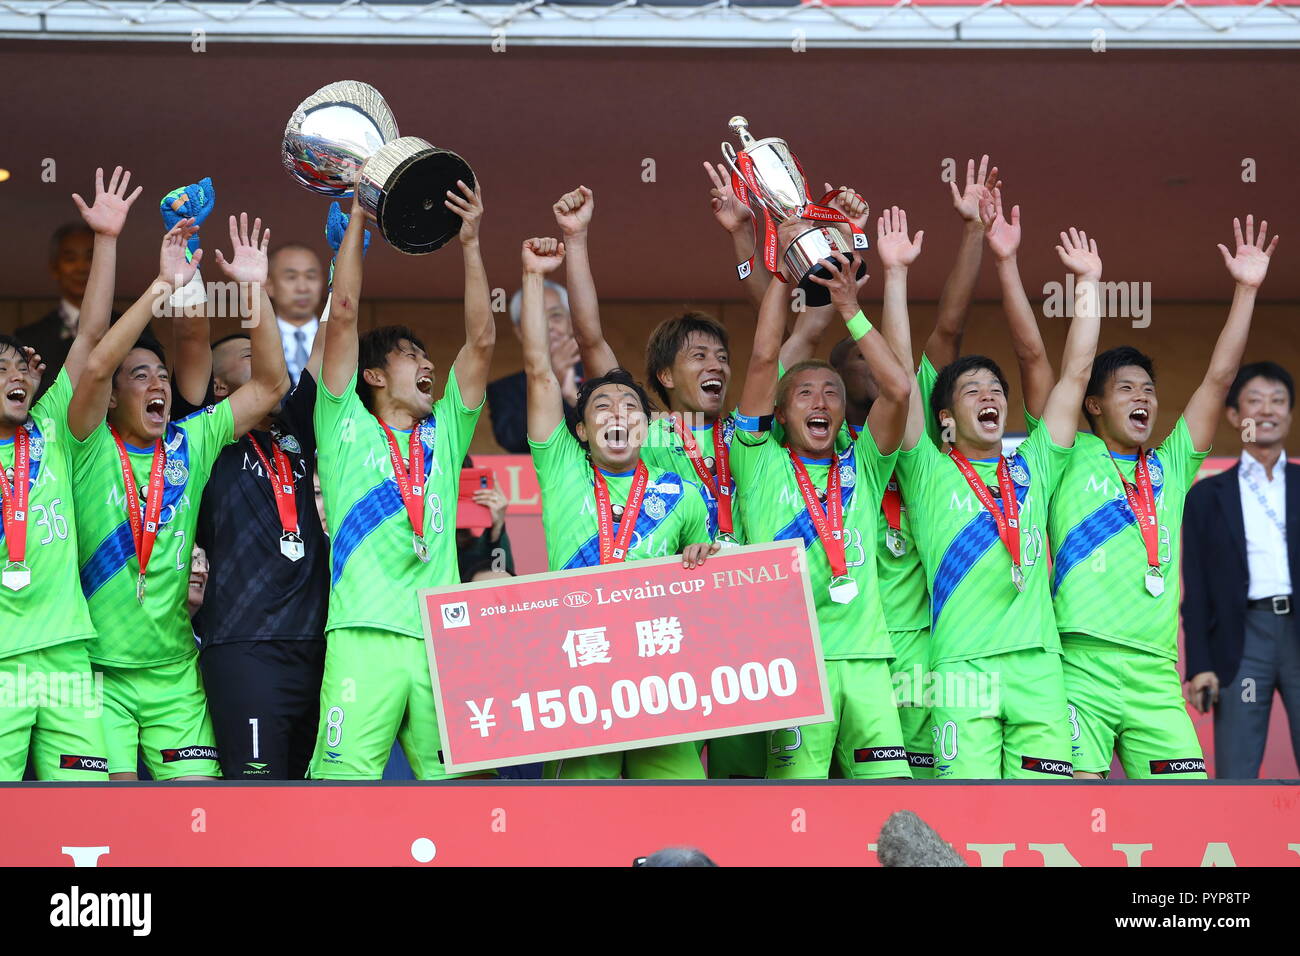 Saitama Japan 27th Oct 18 Shonan Bellmare Team Group Football Soccer Shonan Bellmare Players Celebrate On The Podium With The Trophy After Winning The 18 J League Ybc Levain Cup Final Match Between